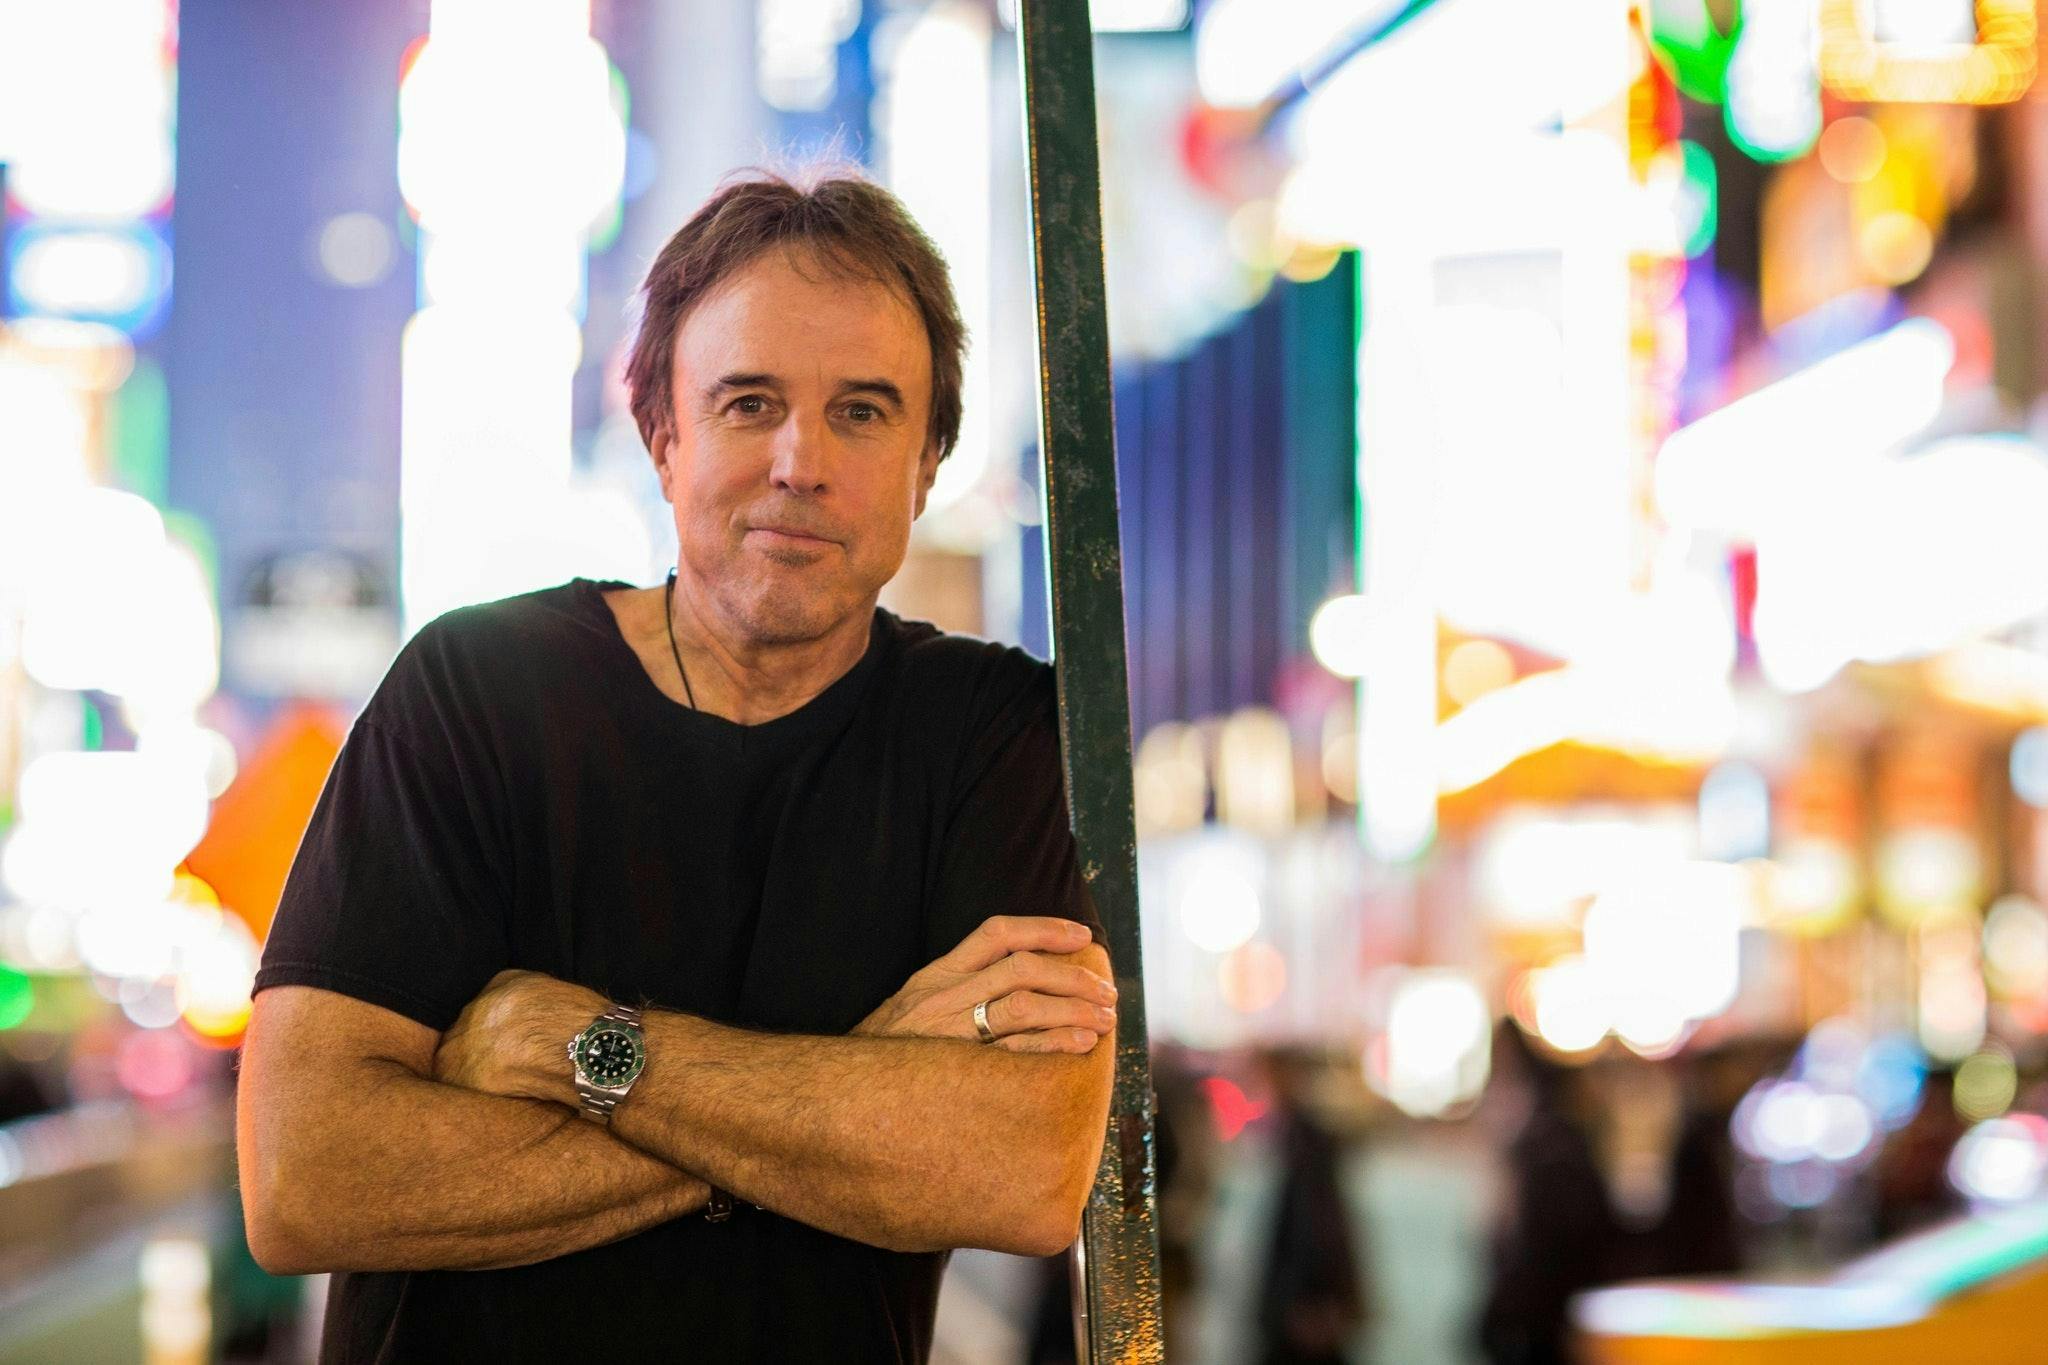 Comedian Kevin Nealon Comedy Tour live in Naples, Florida